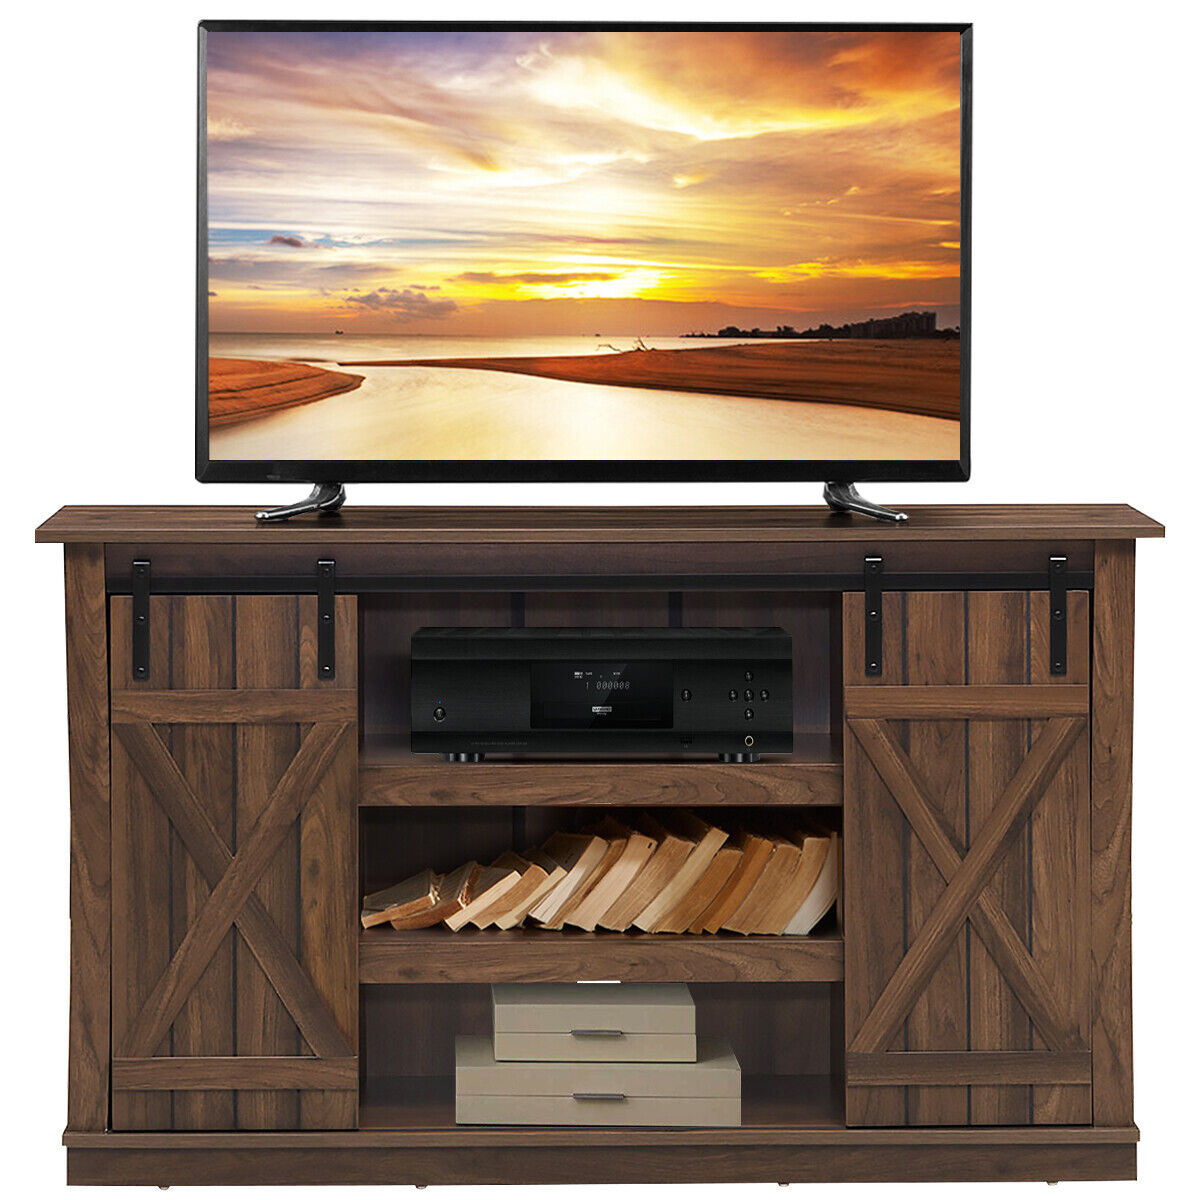 GCP Products Sliding Barn TV Stand for TVs Up to 60" Console Table Flat Screen Bedroom Brown